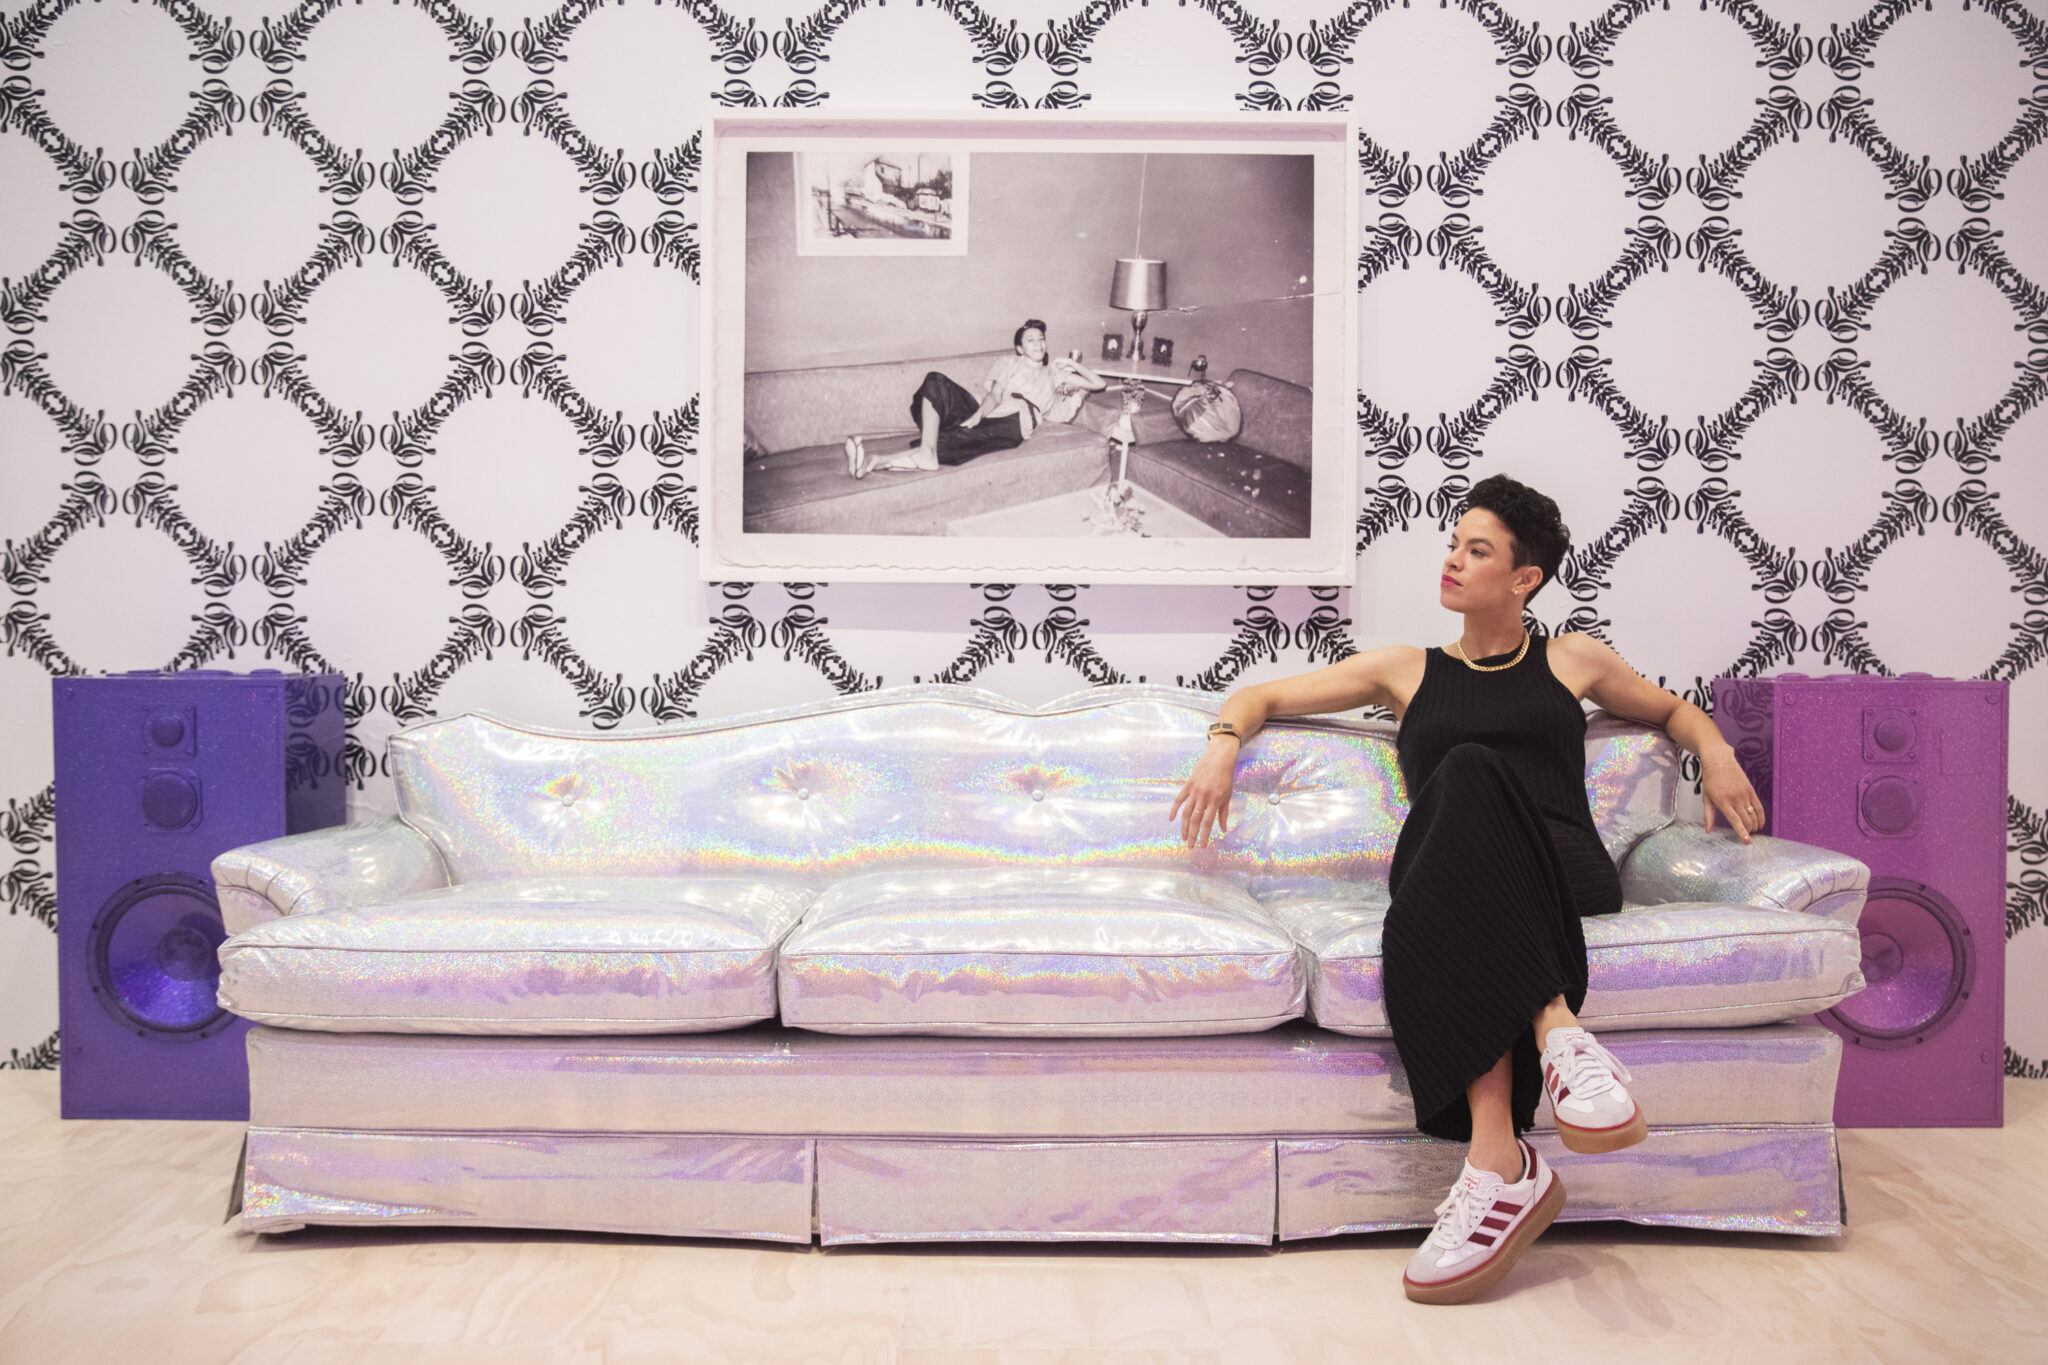 Sadie Barnette sits on her silver holographic couch in a wallpapered room. A large photo is framed behind her. A purple and a pink glittery speakers are on either side of the couch.